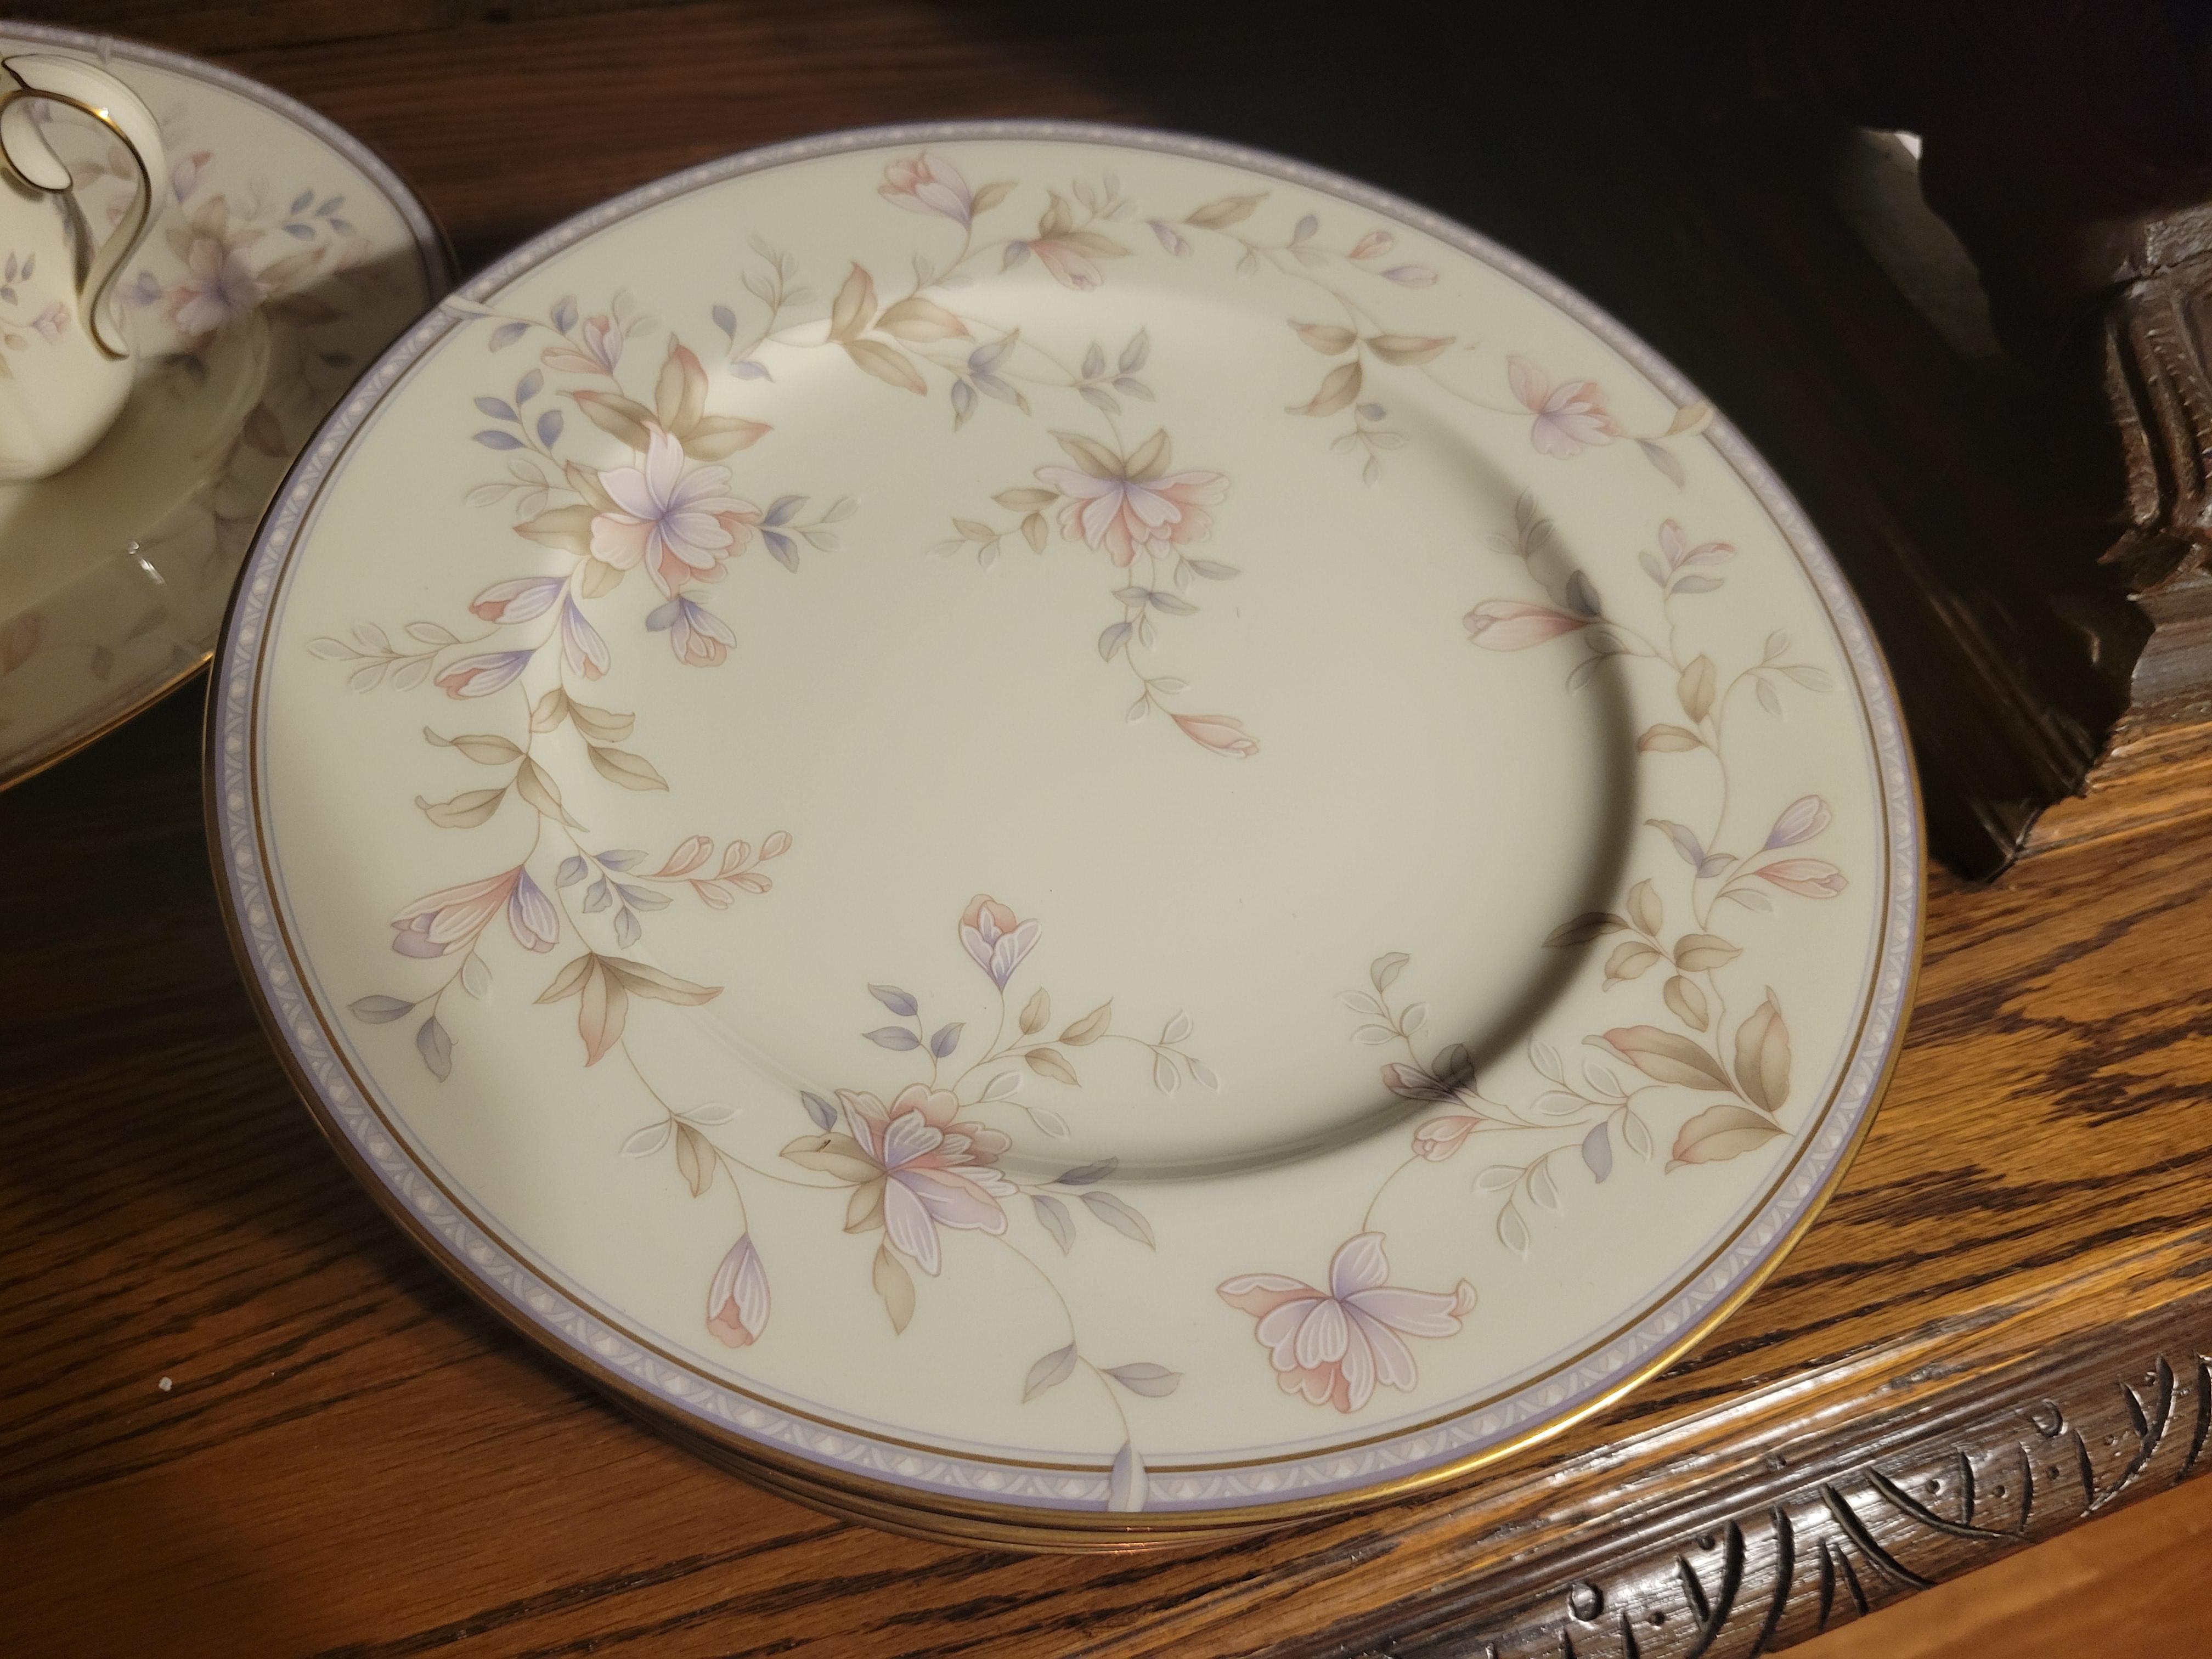 Noritake Highland Park 9754 bone china set for 8.
The set includes:
8 cups
8 saucers
8 dinner plates 10.5